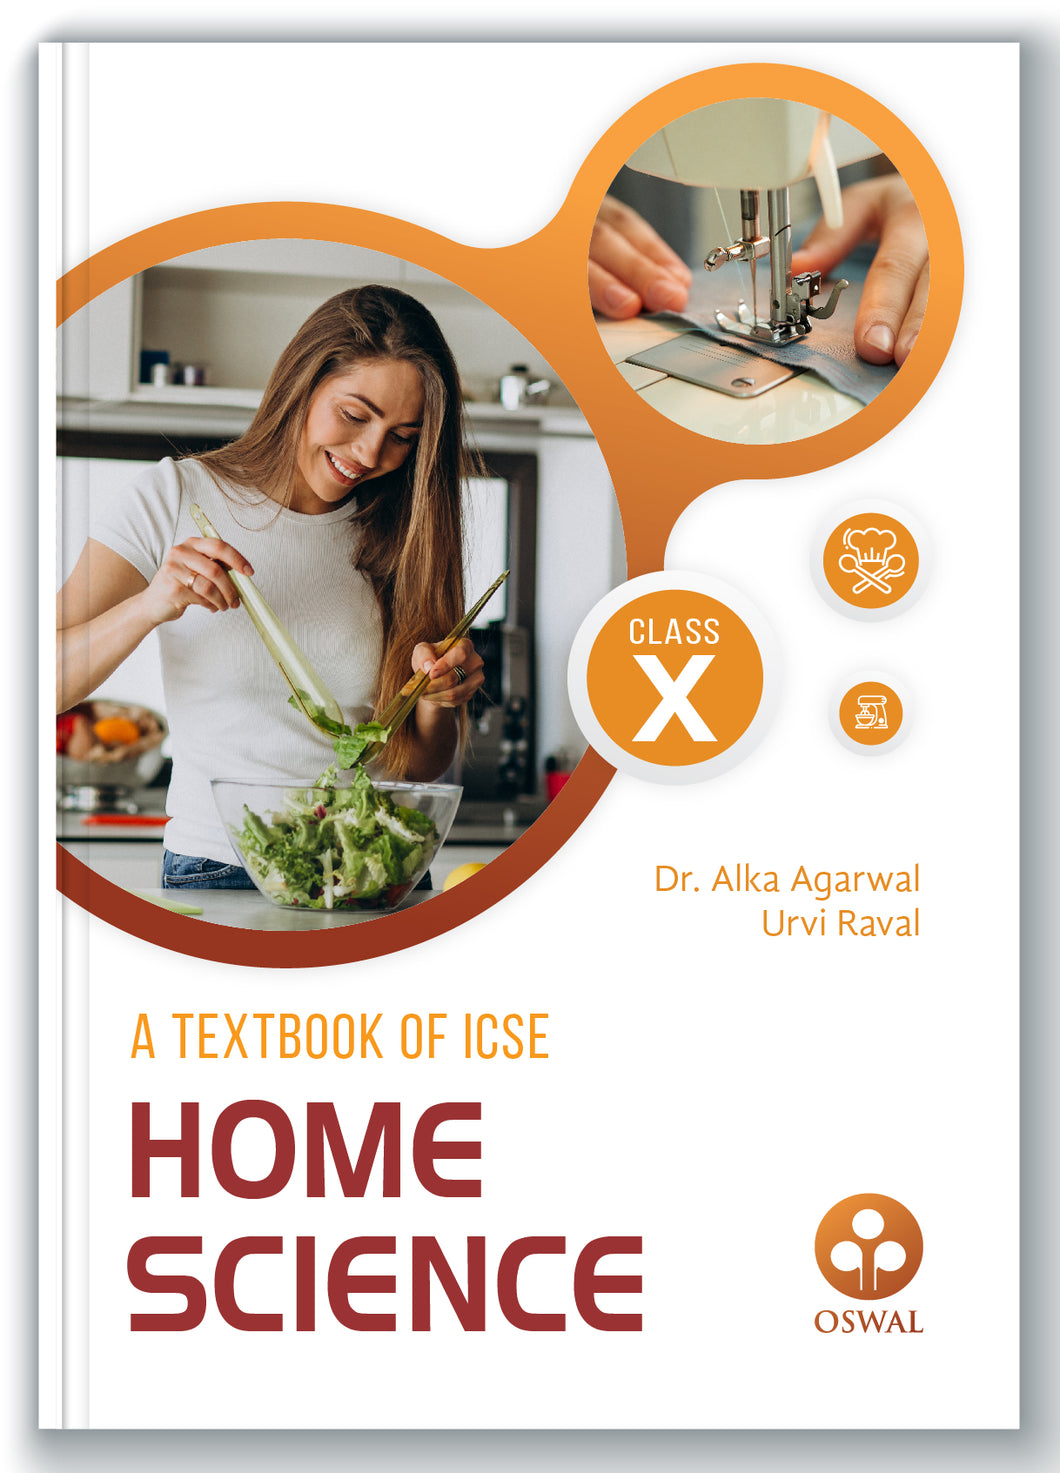 Oswal Home Science Textbook for ICSE Class 10 : By Dr. Alka Agarwal, Urvi Raval, Latest Edition 2023-24